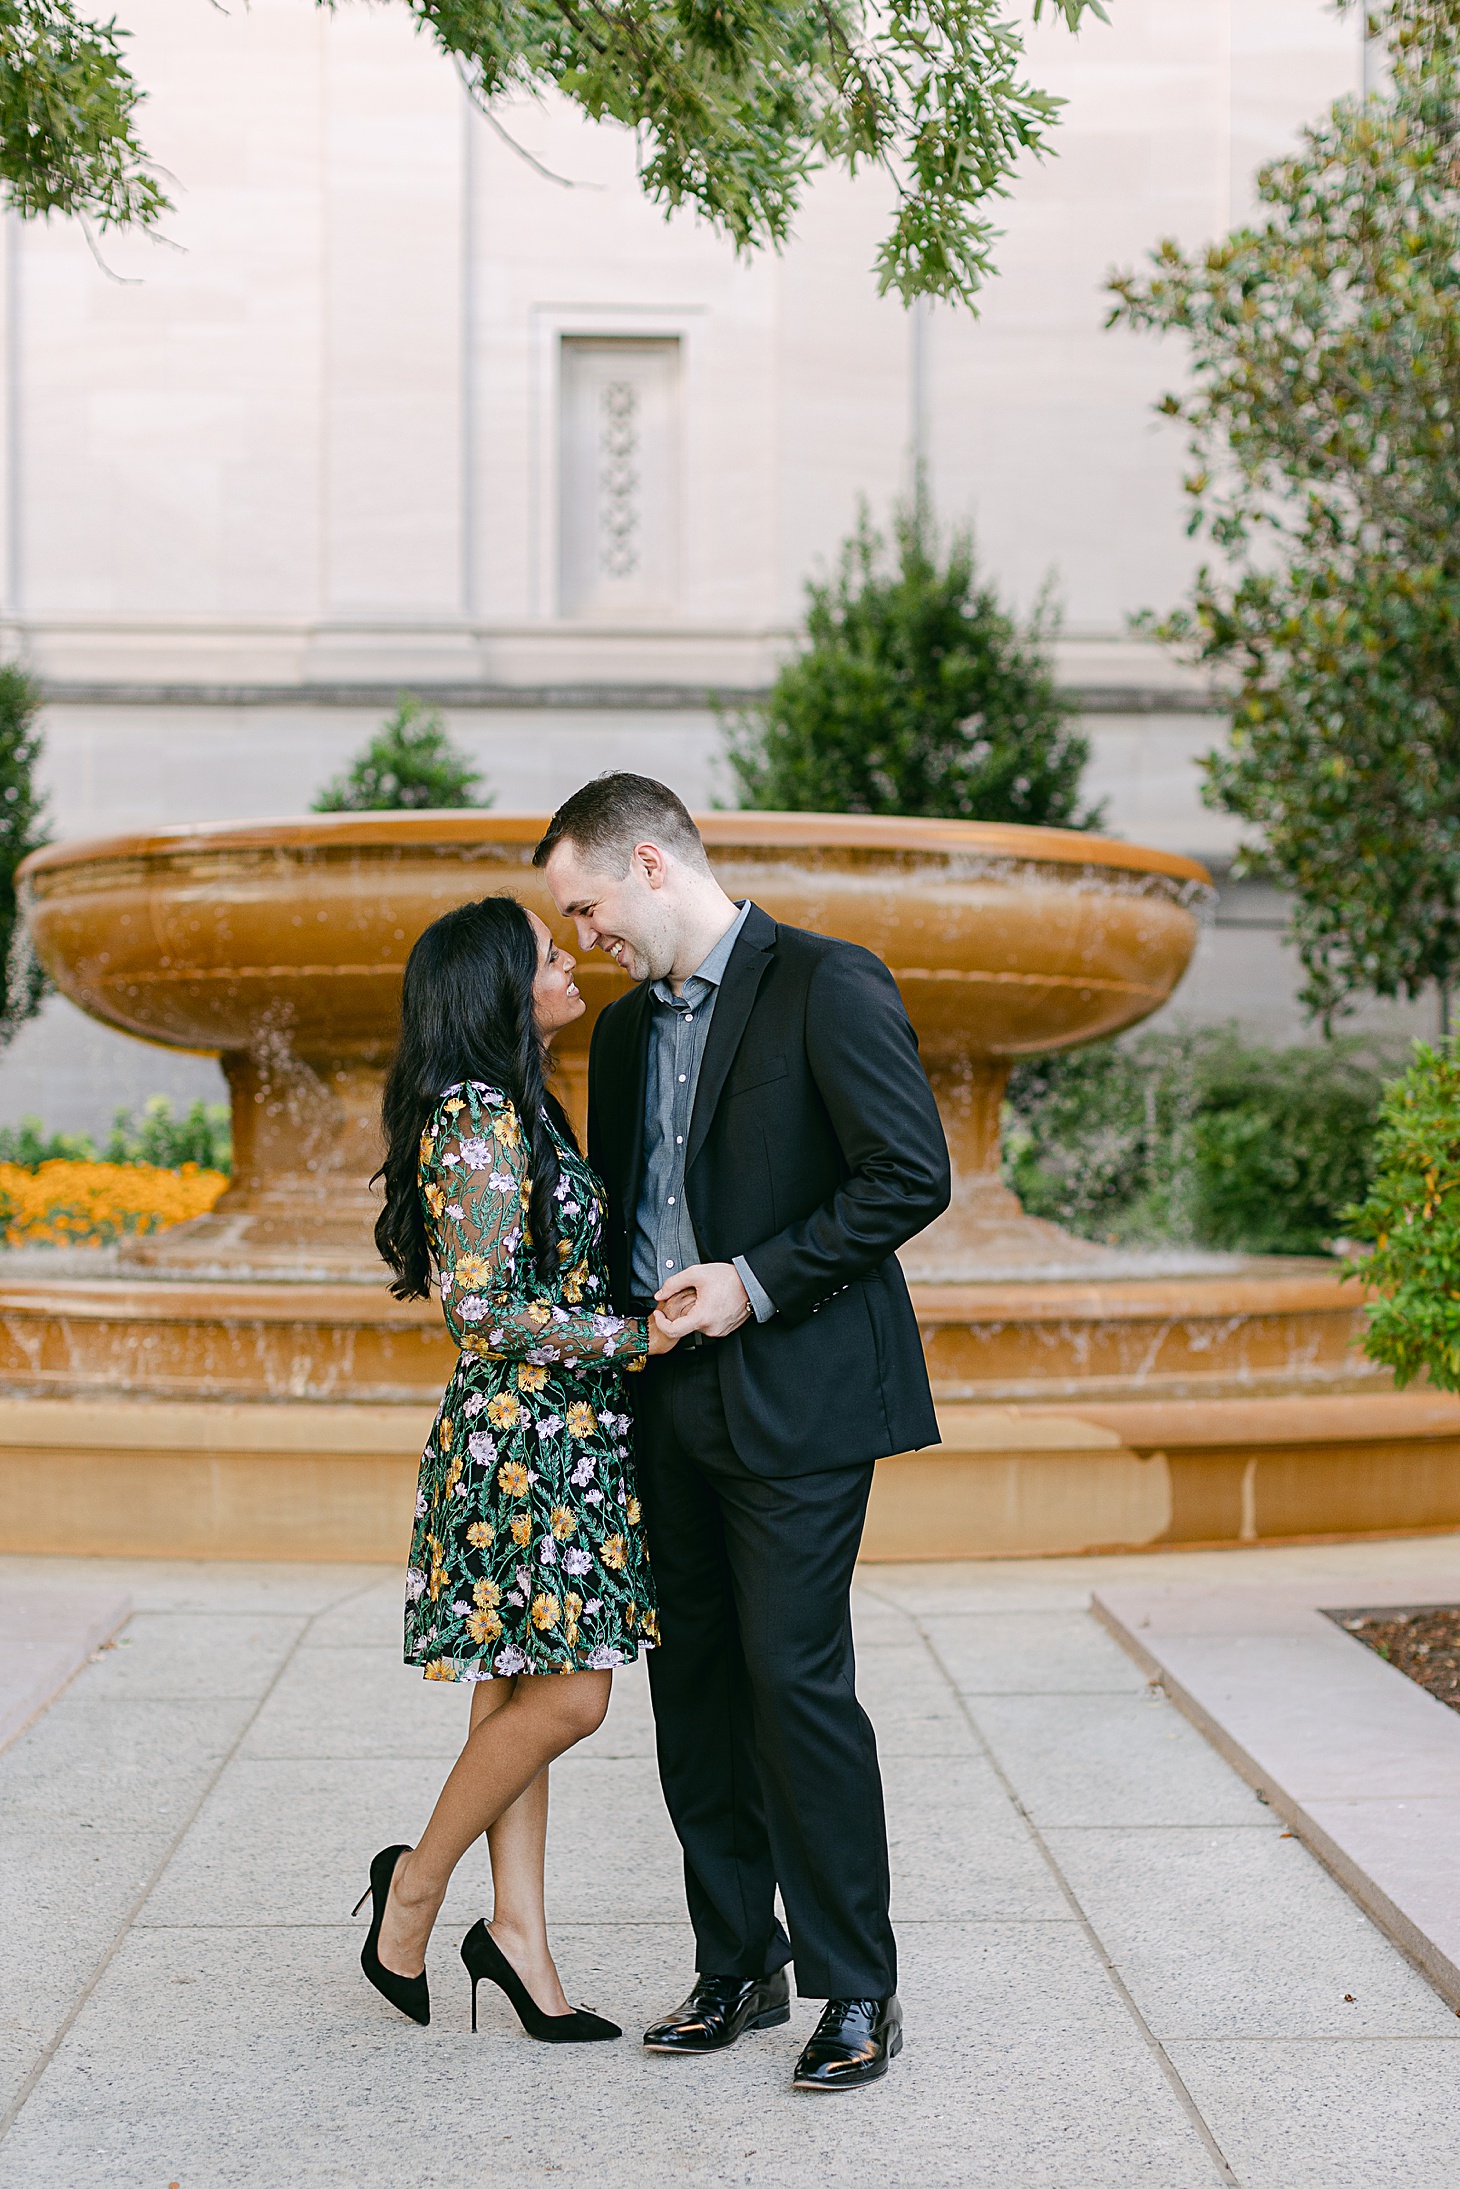 Sunset engagement portraits at National Gallery of Art by Sarah Bradshaw Photography